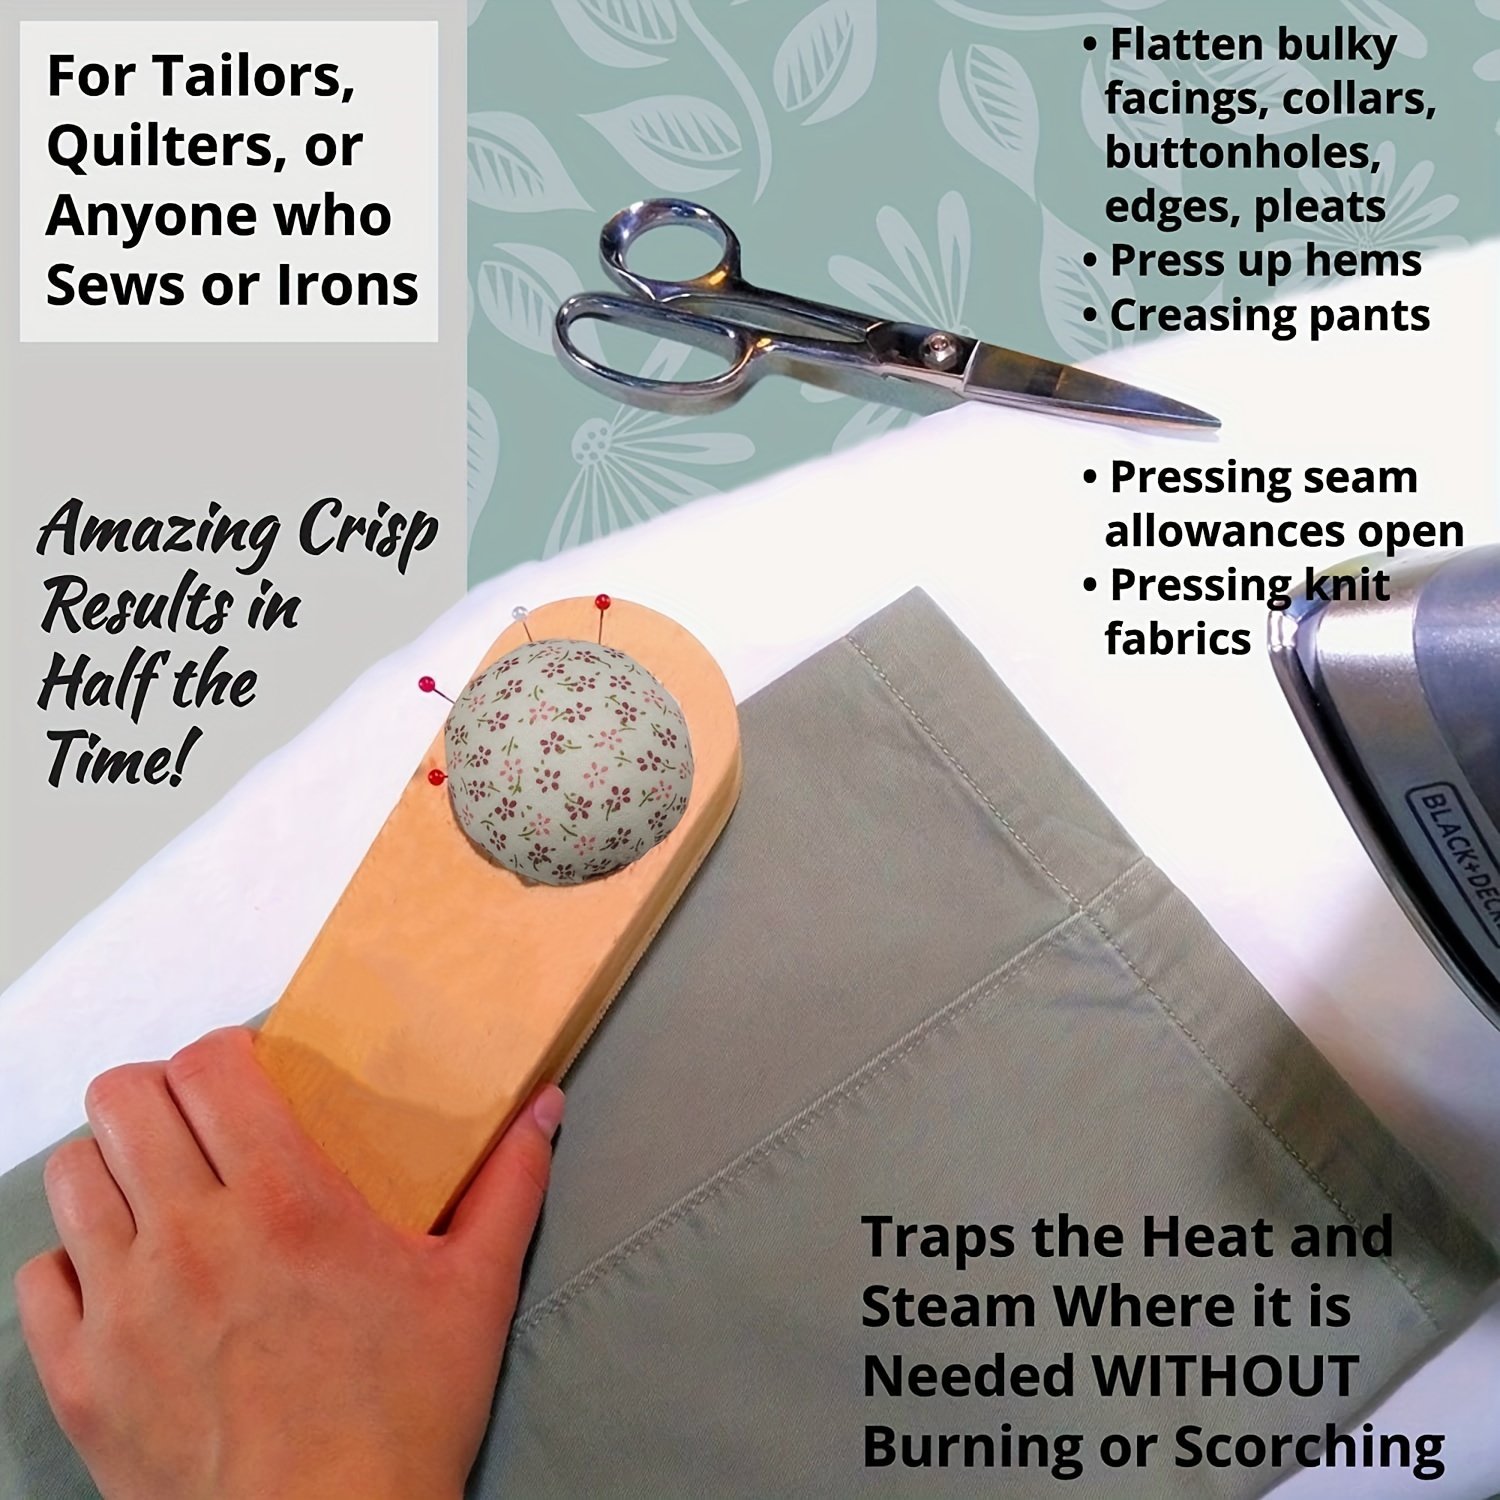  Extra Size Tailors Clapper Quilters Pressing and Seam